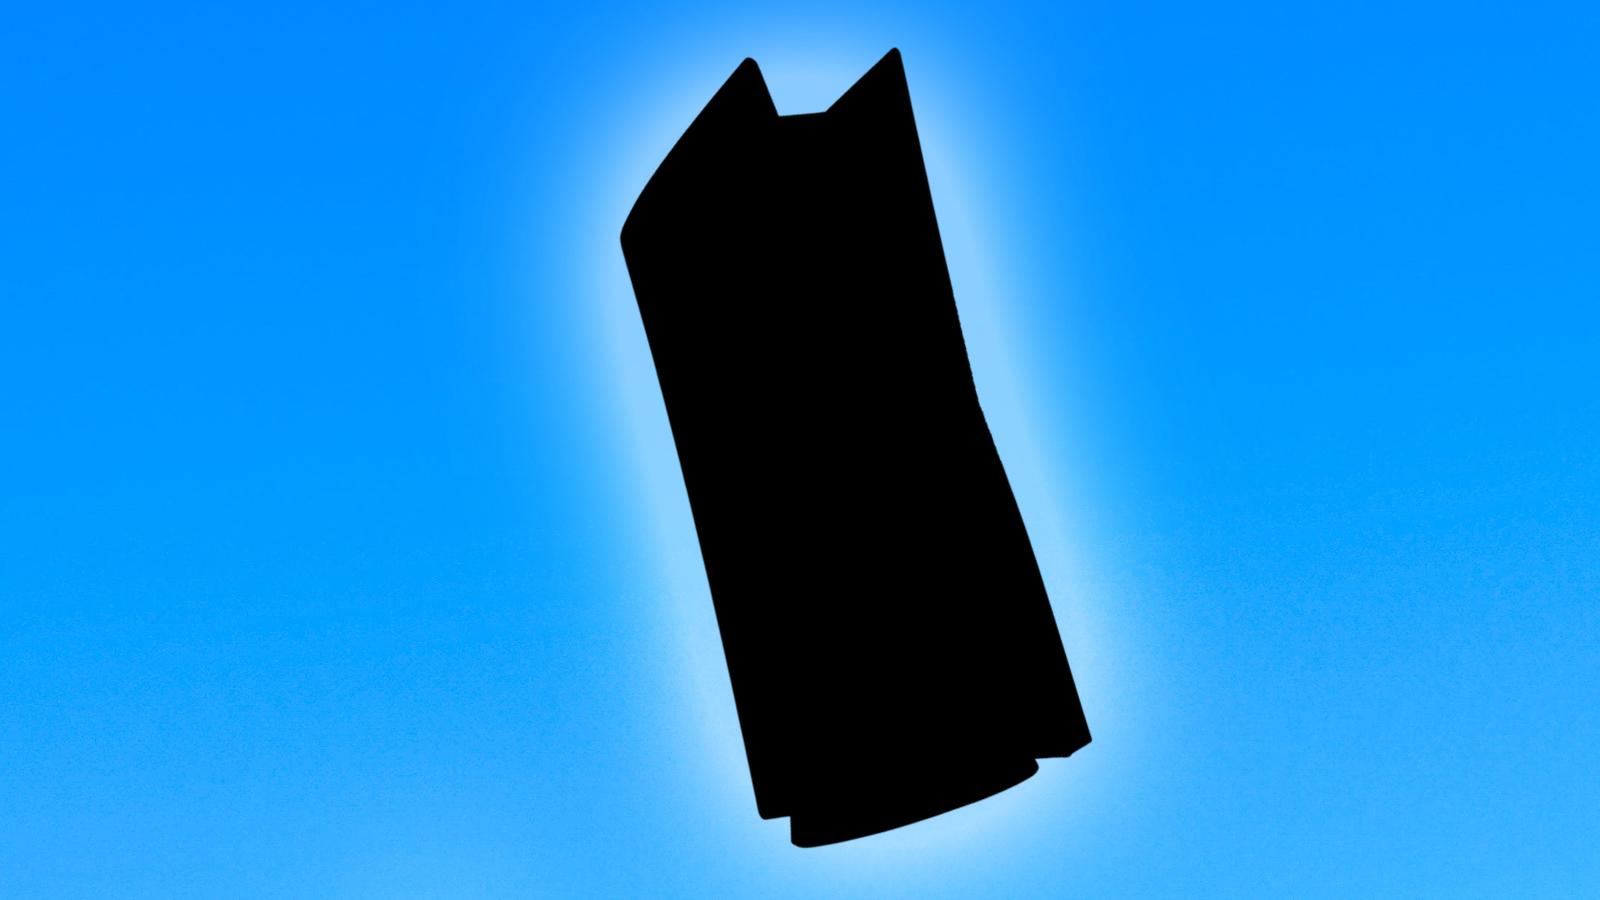 PS5 in silhouette with a blue background